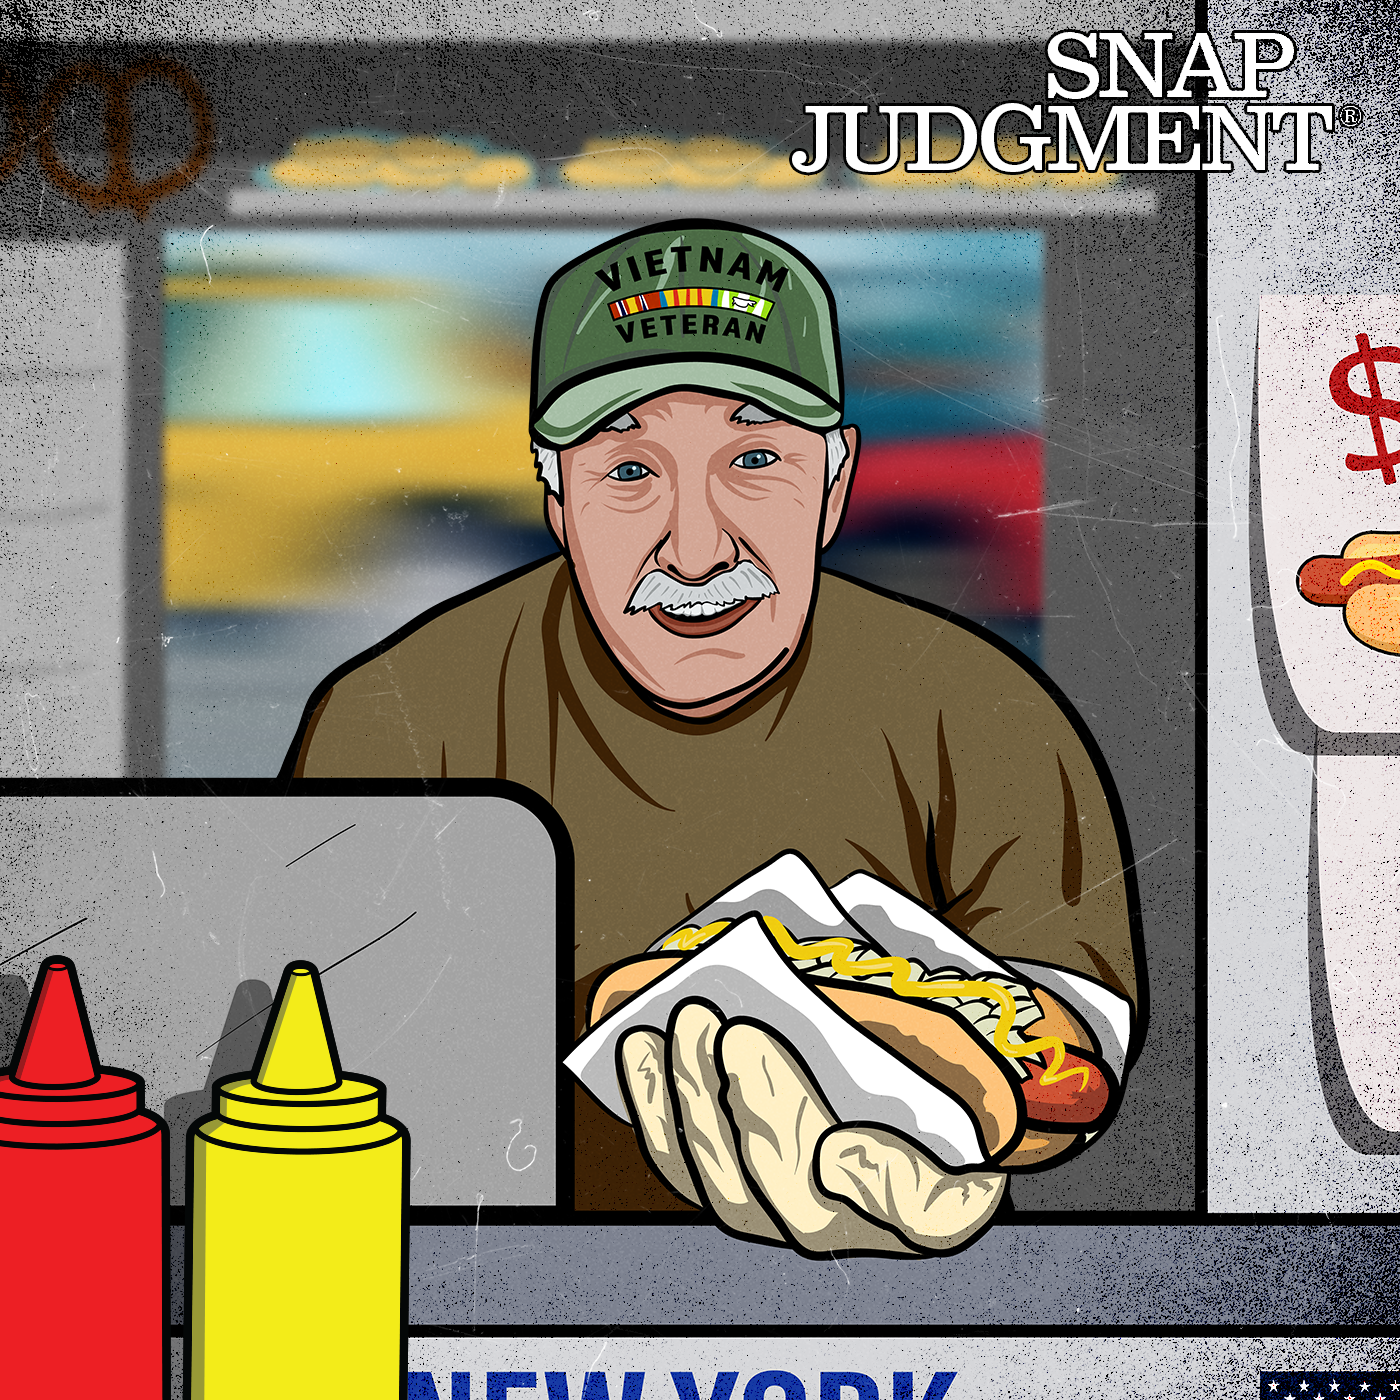 Thumbnail for "The Hot Dog King of New York".